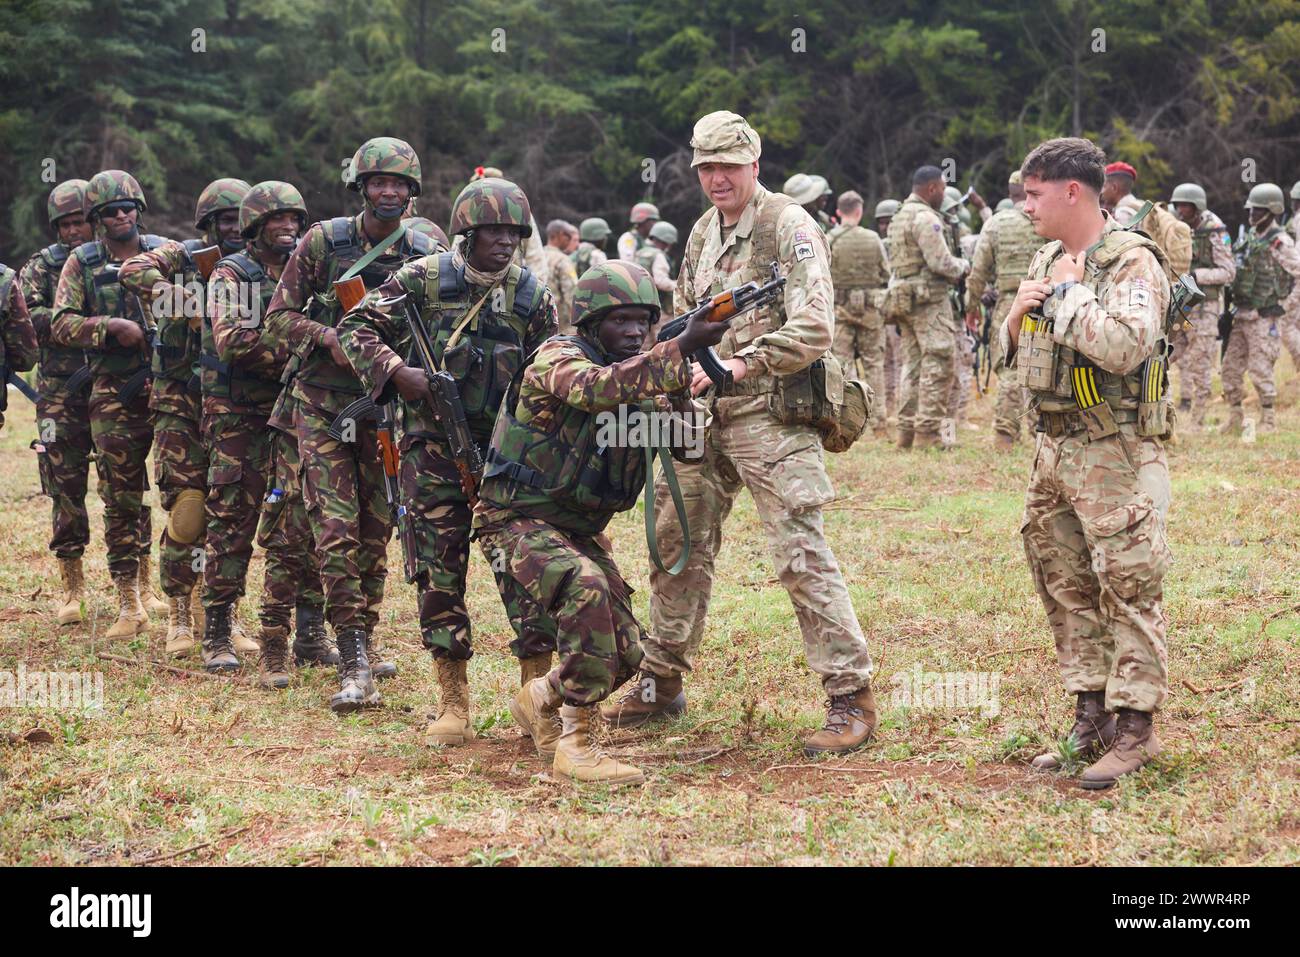 British Army soldiers from the 1st Battalion Irish Guards, 11th Security Force Brigade, instruct military members of the Kenya Defence Forces on urban combat operations during Justified Accord 2024 (JA24) at the Counter Insurgency Terrorism and Stability Operations Training Centre in Nanyuki, Kenya, February 26, 2024. JA24 is U.S. Africa Command's largest exercise in East Africa, running from February 26 - March 7. Led by U.S. Army Southern European Task Force, Africa (SETAF-AF), and hosted in Kenya, this year's exercise will incorporate personnel and units from 23 nations. This multinational Stock Photo